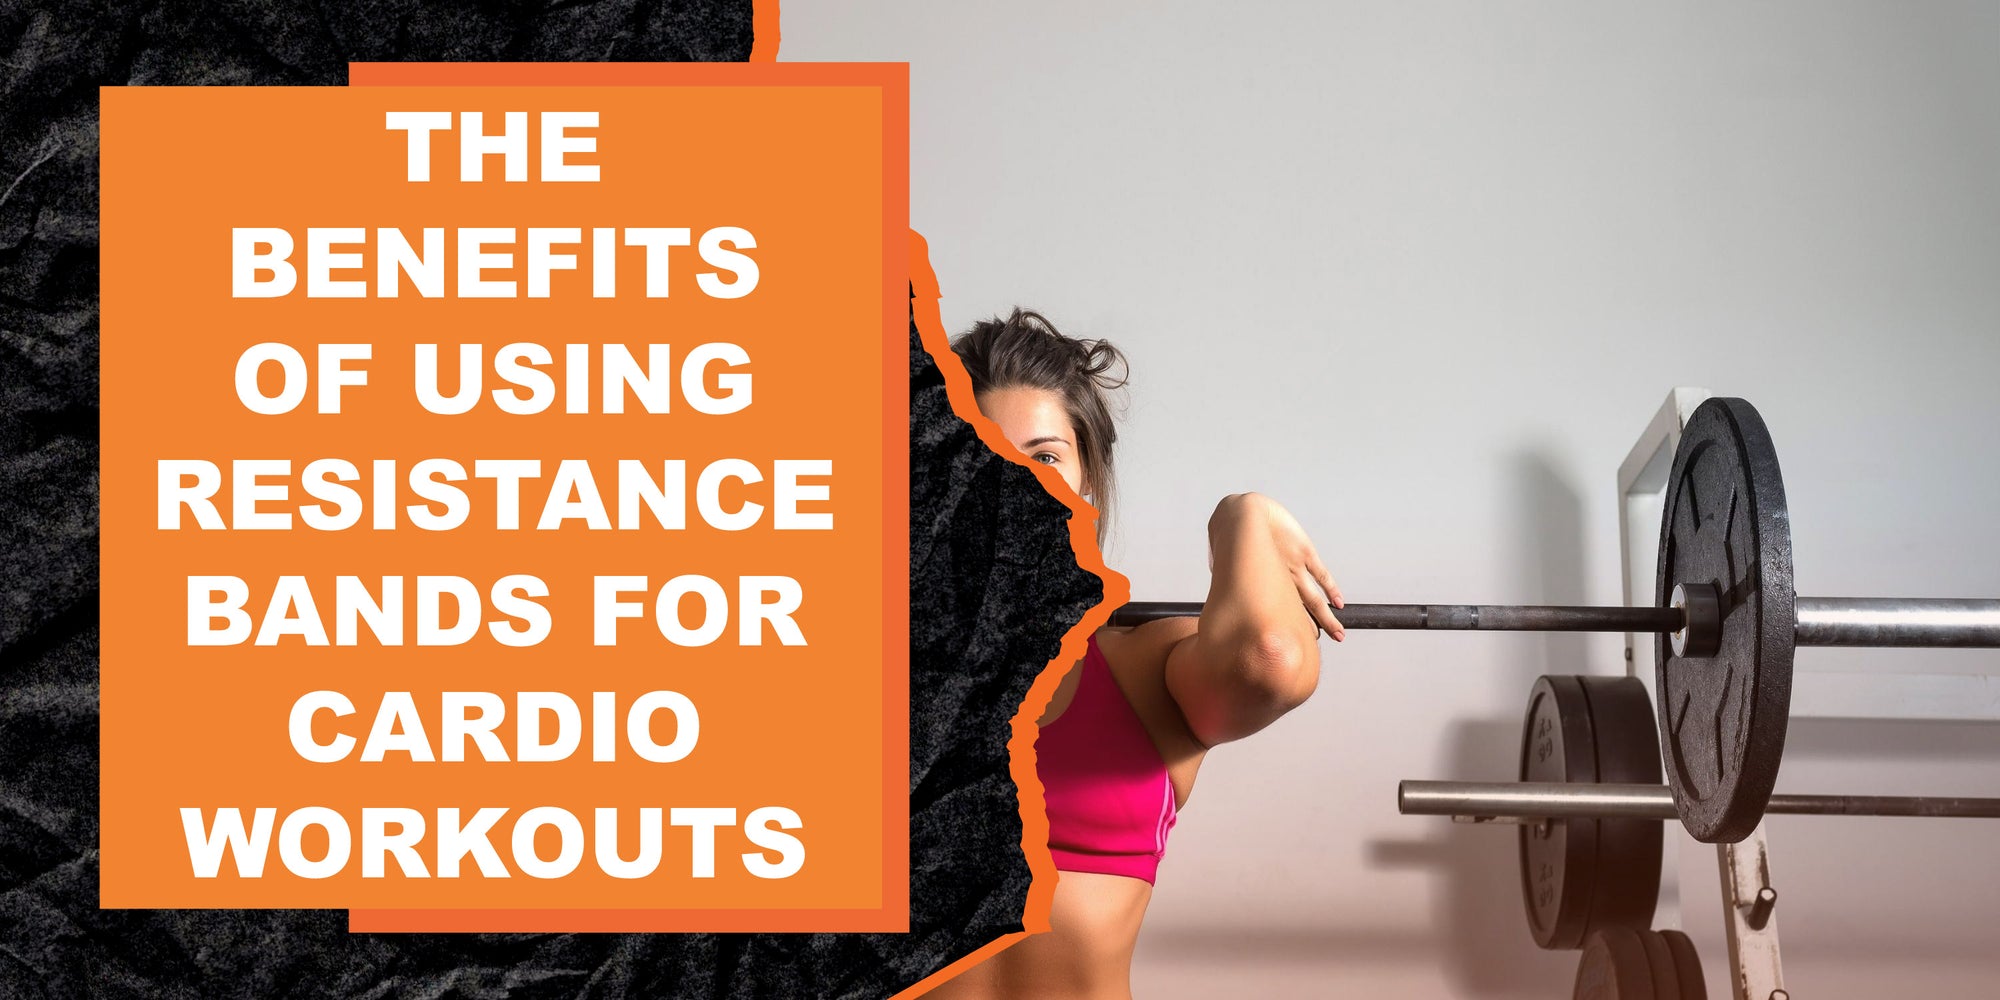 The Benefits of Using Resistance Bands for Cardio Workouts